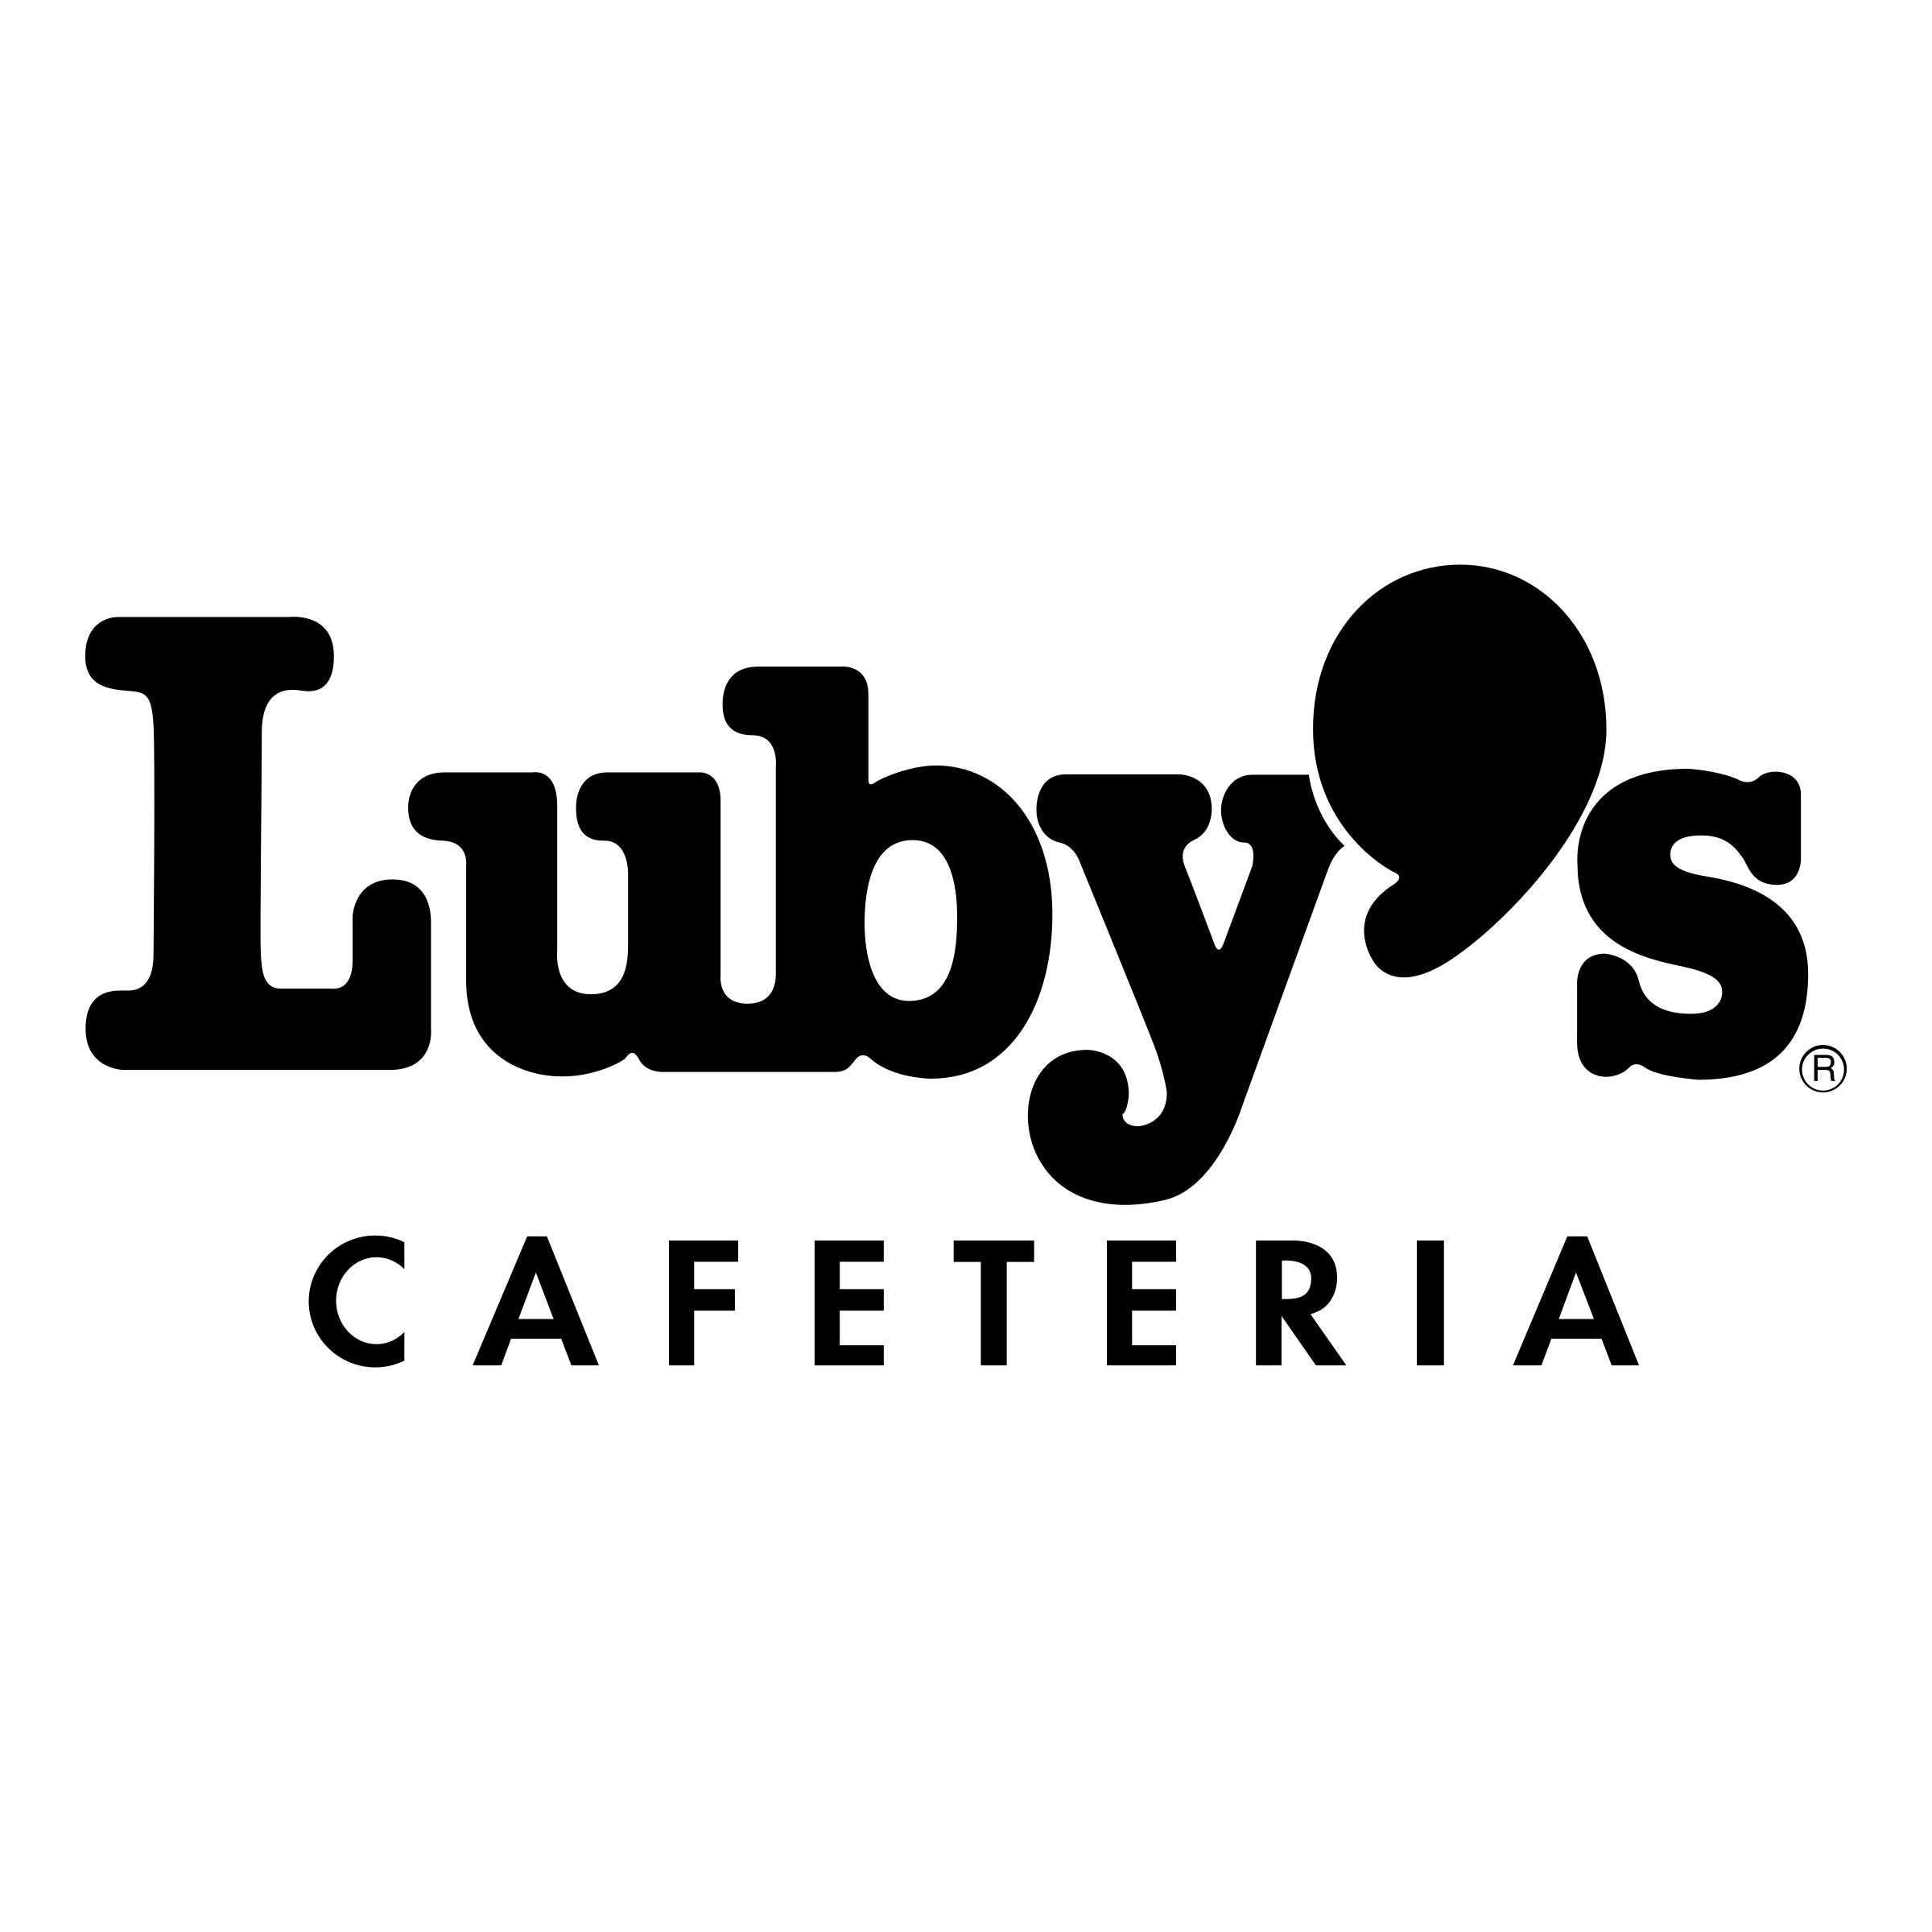 Luby's Logo - Luby's Logo PNG Transparent & SVG Vector - Freebie Supply